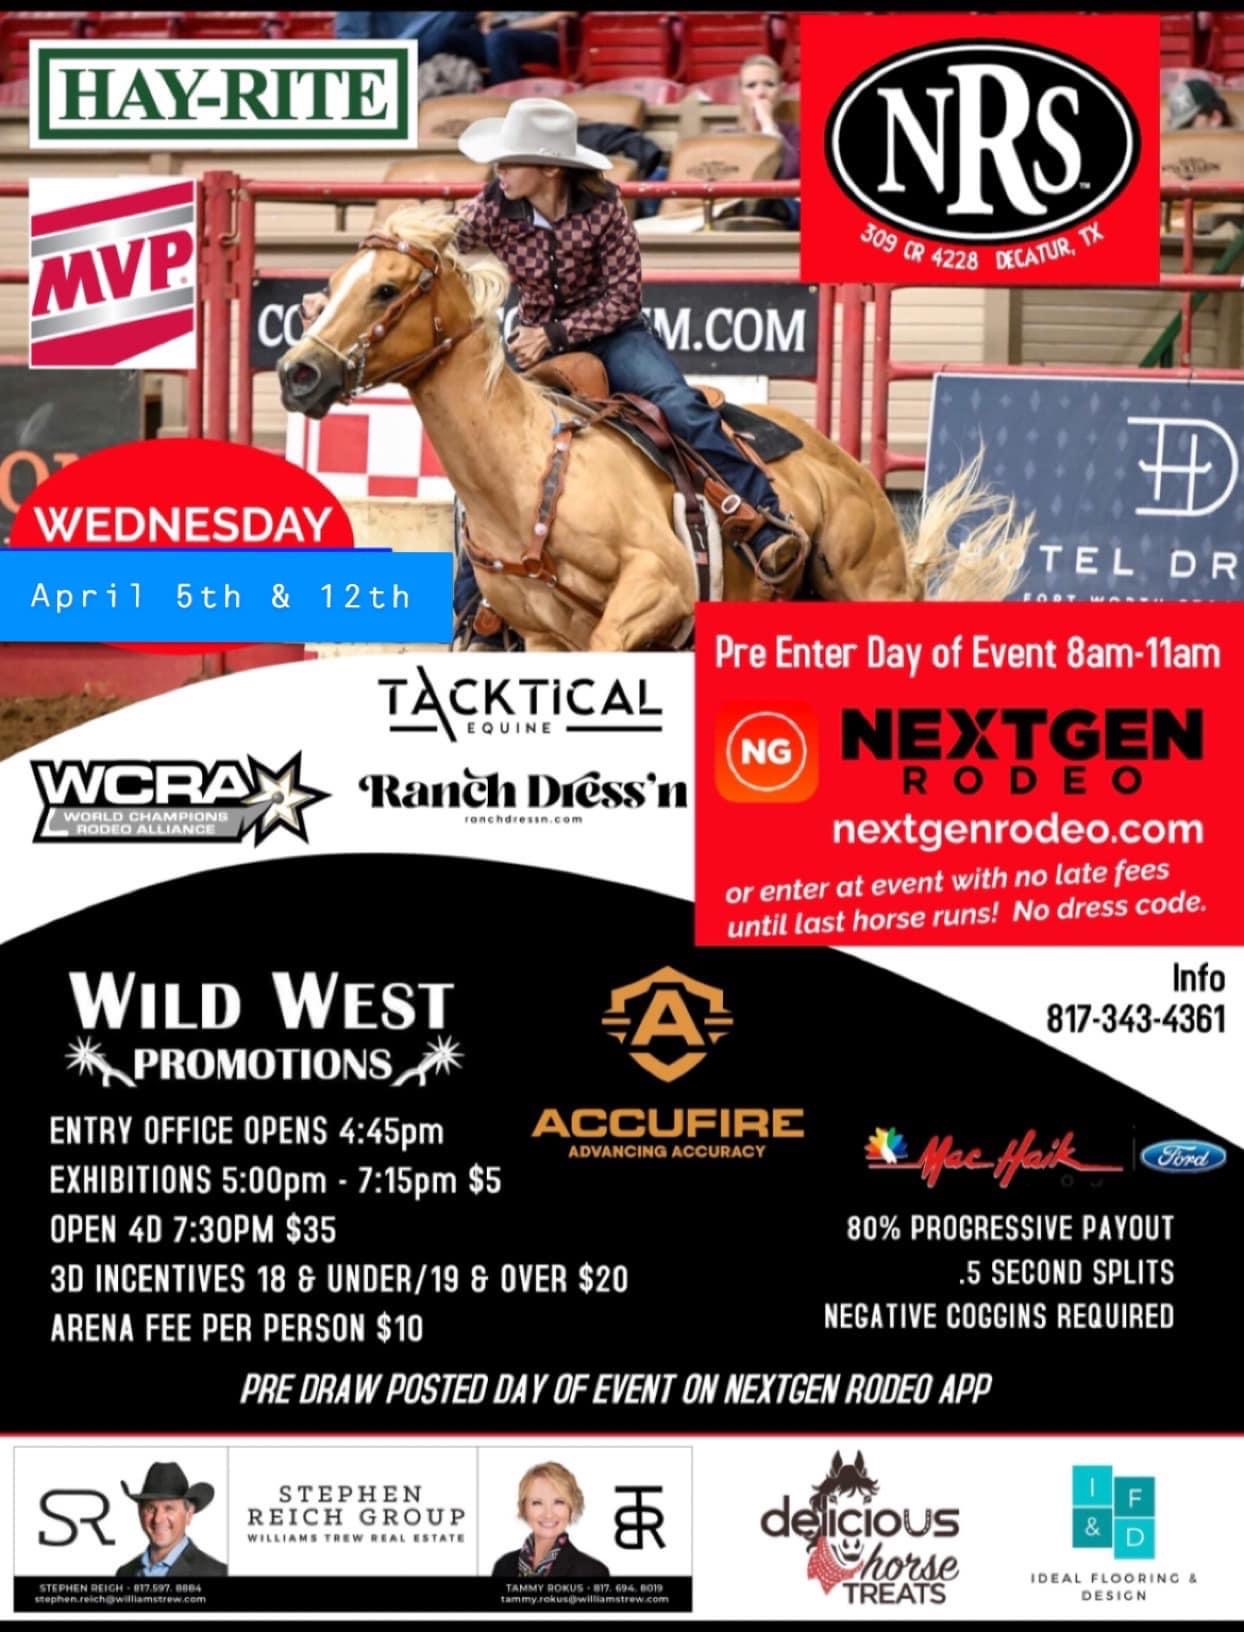 Wild West Promotions